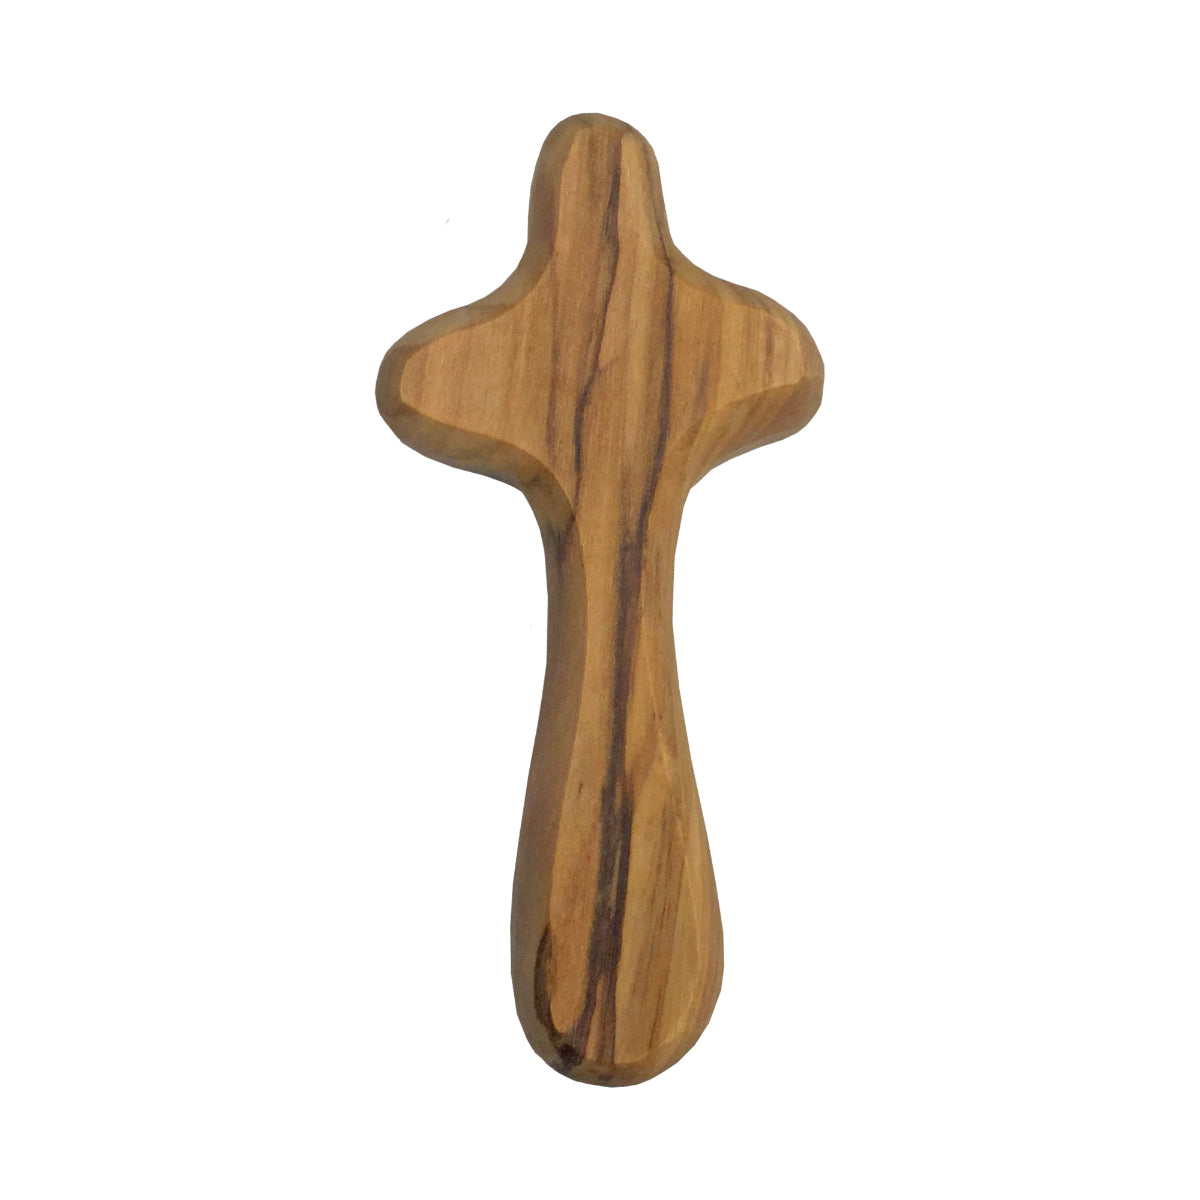 Fairtrade Olive Wood Holding Crosses From The Holy Land and Crosses From Kenya